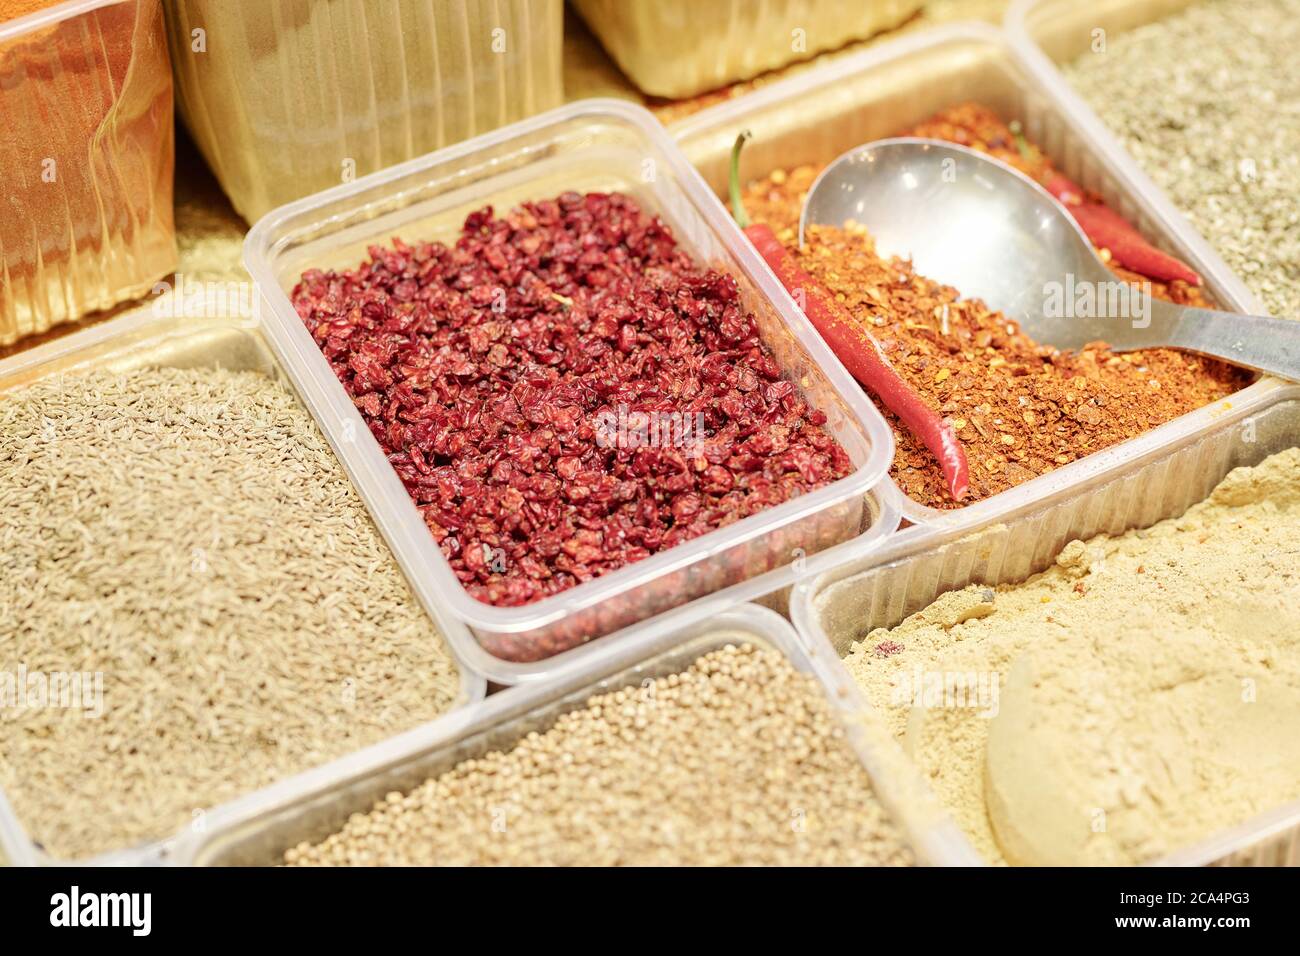 Close-up of various spices in disposable containers used for cooking savory dishes at food market Stock Photo